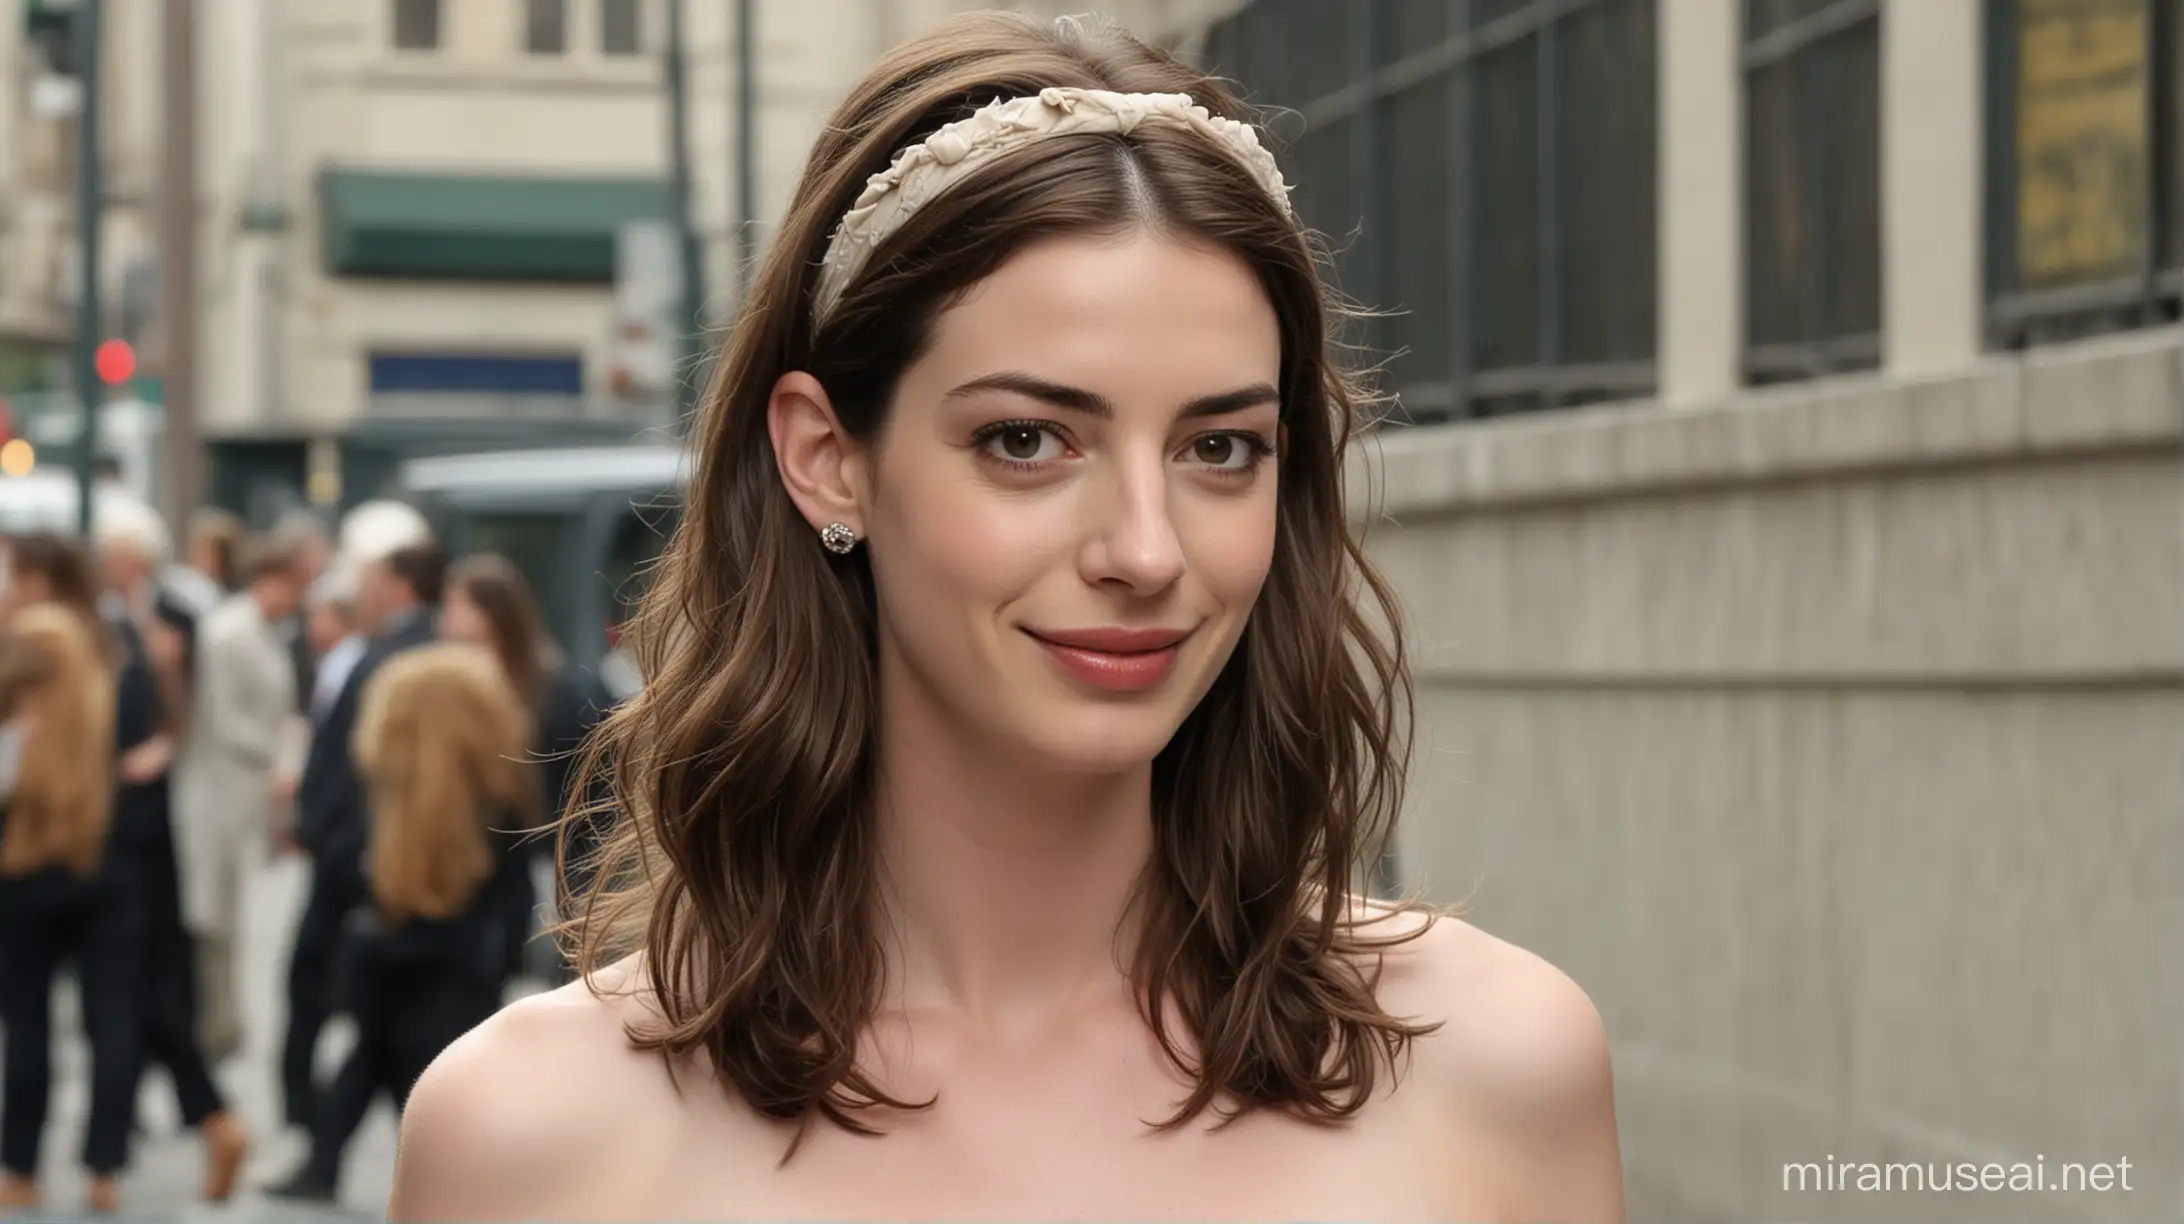 Naked 20 years old anne hathaway standing in public, long wavy hair with hairband